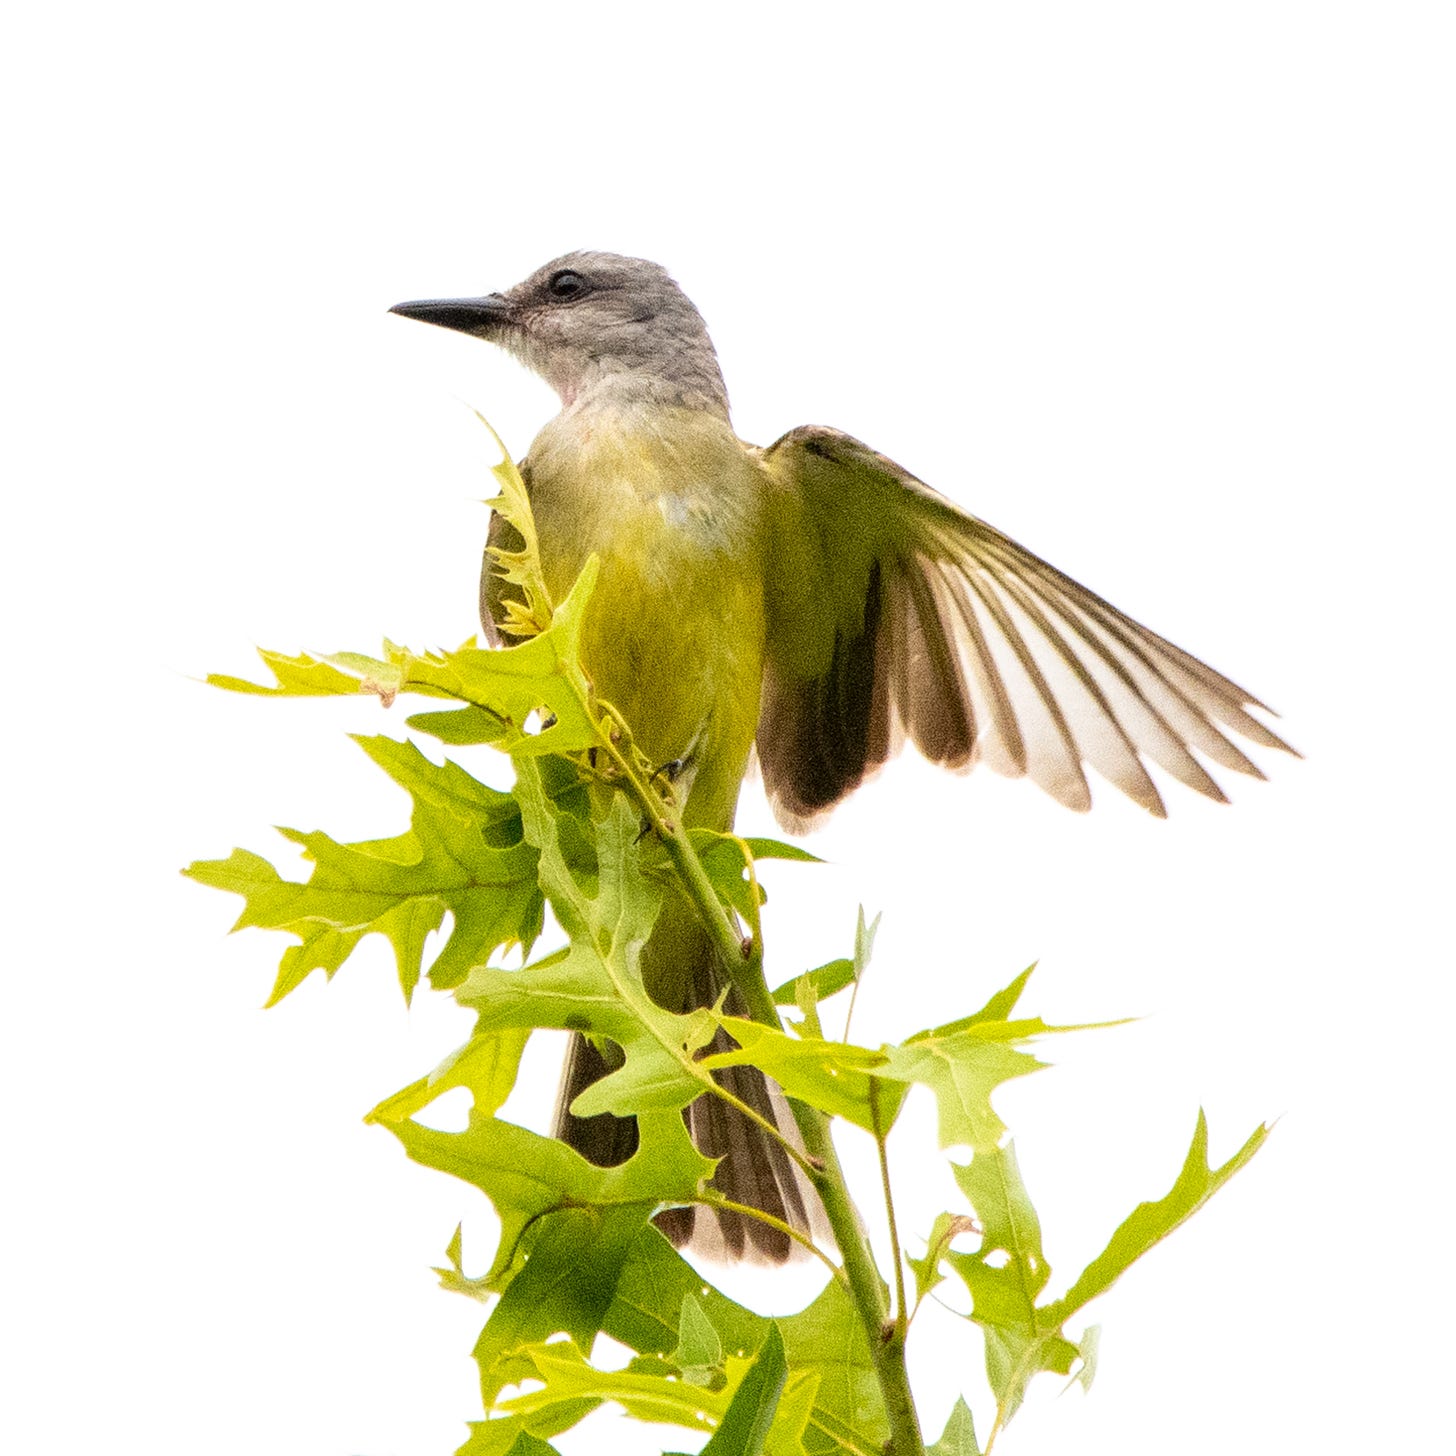 A Couch's or a tropical kingbird, perched at the top of an oak, breast to the viewer, beak to the left, opposite wing extended